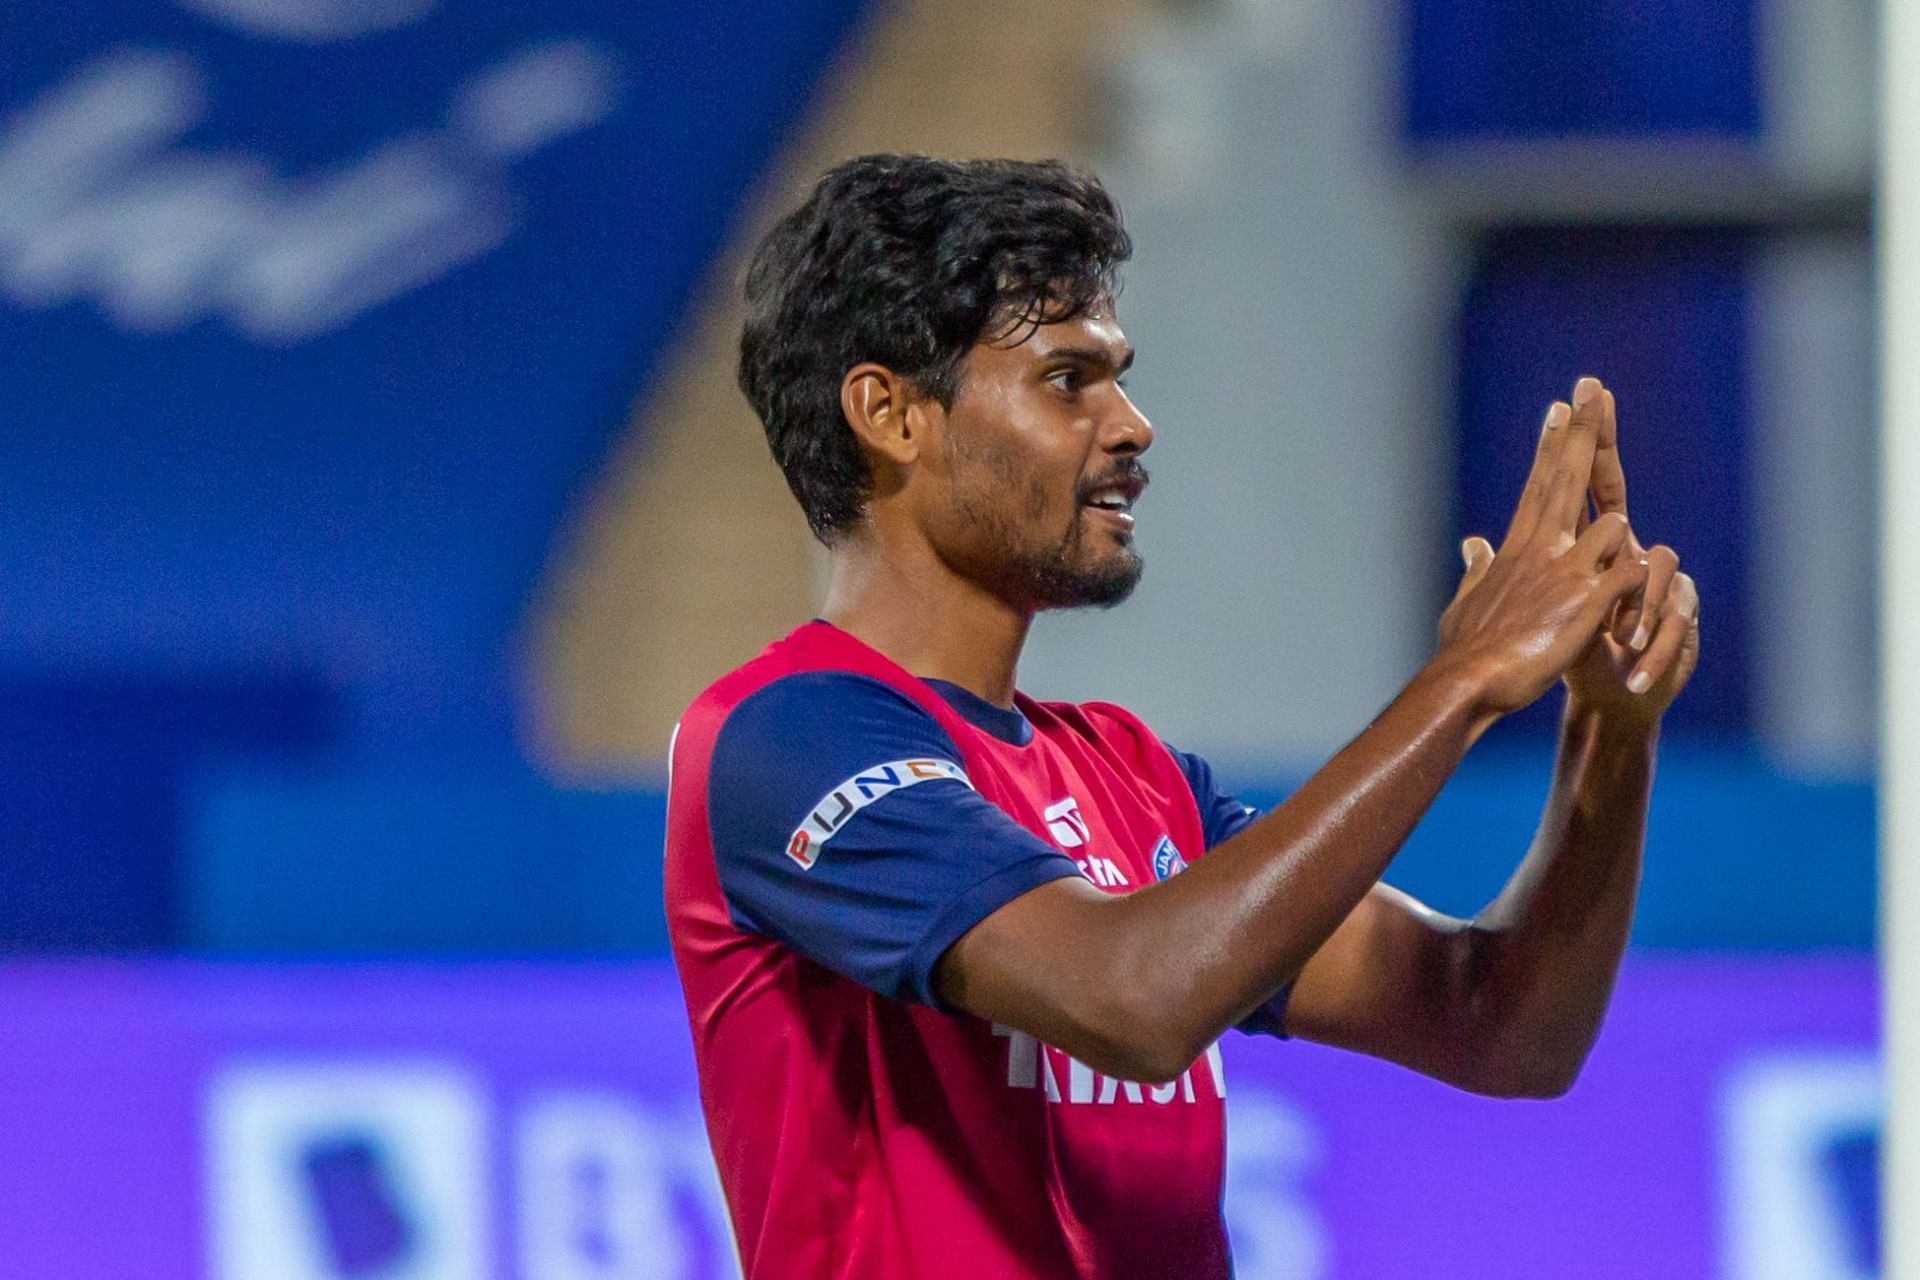 Ritwik Kumar Das has scored two goals and assisted once this season. (Image Courtesy: Twitter/IndSuperLeague)